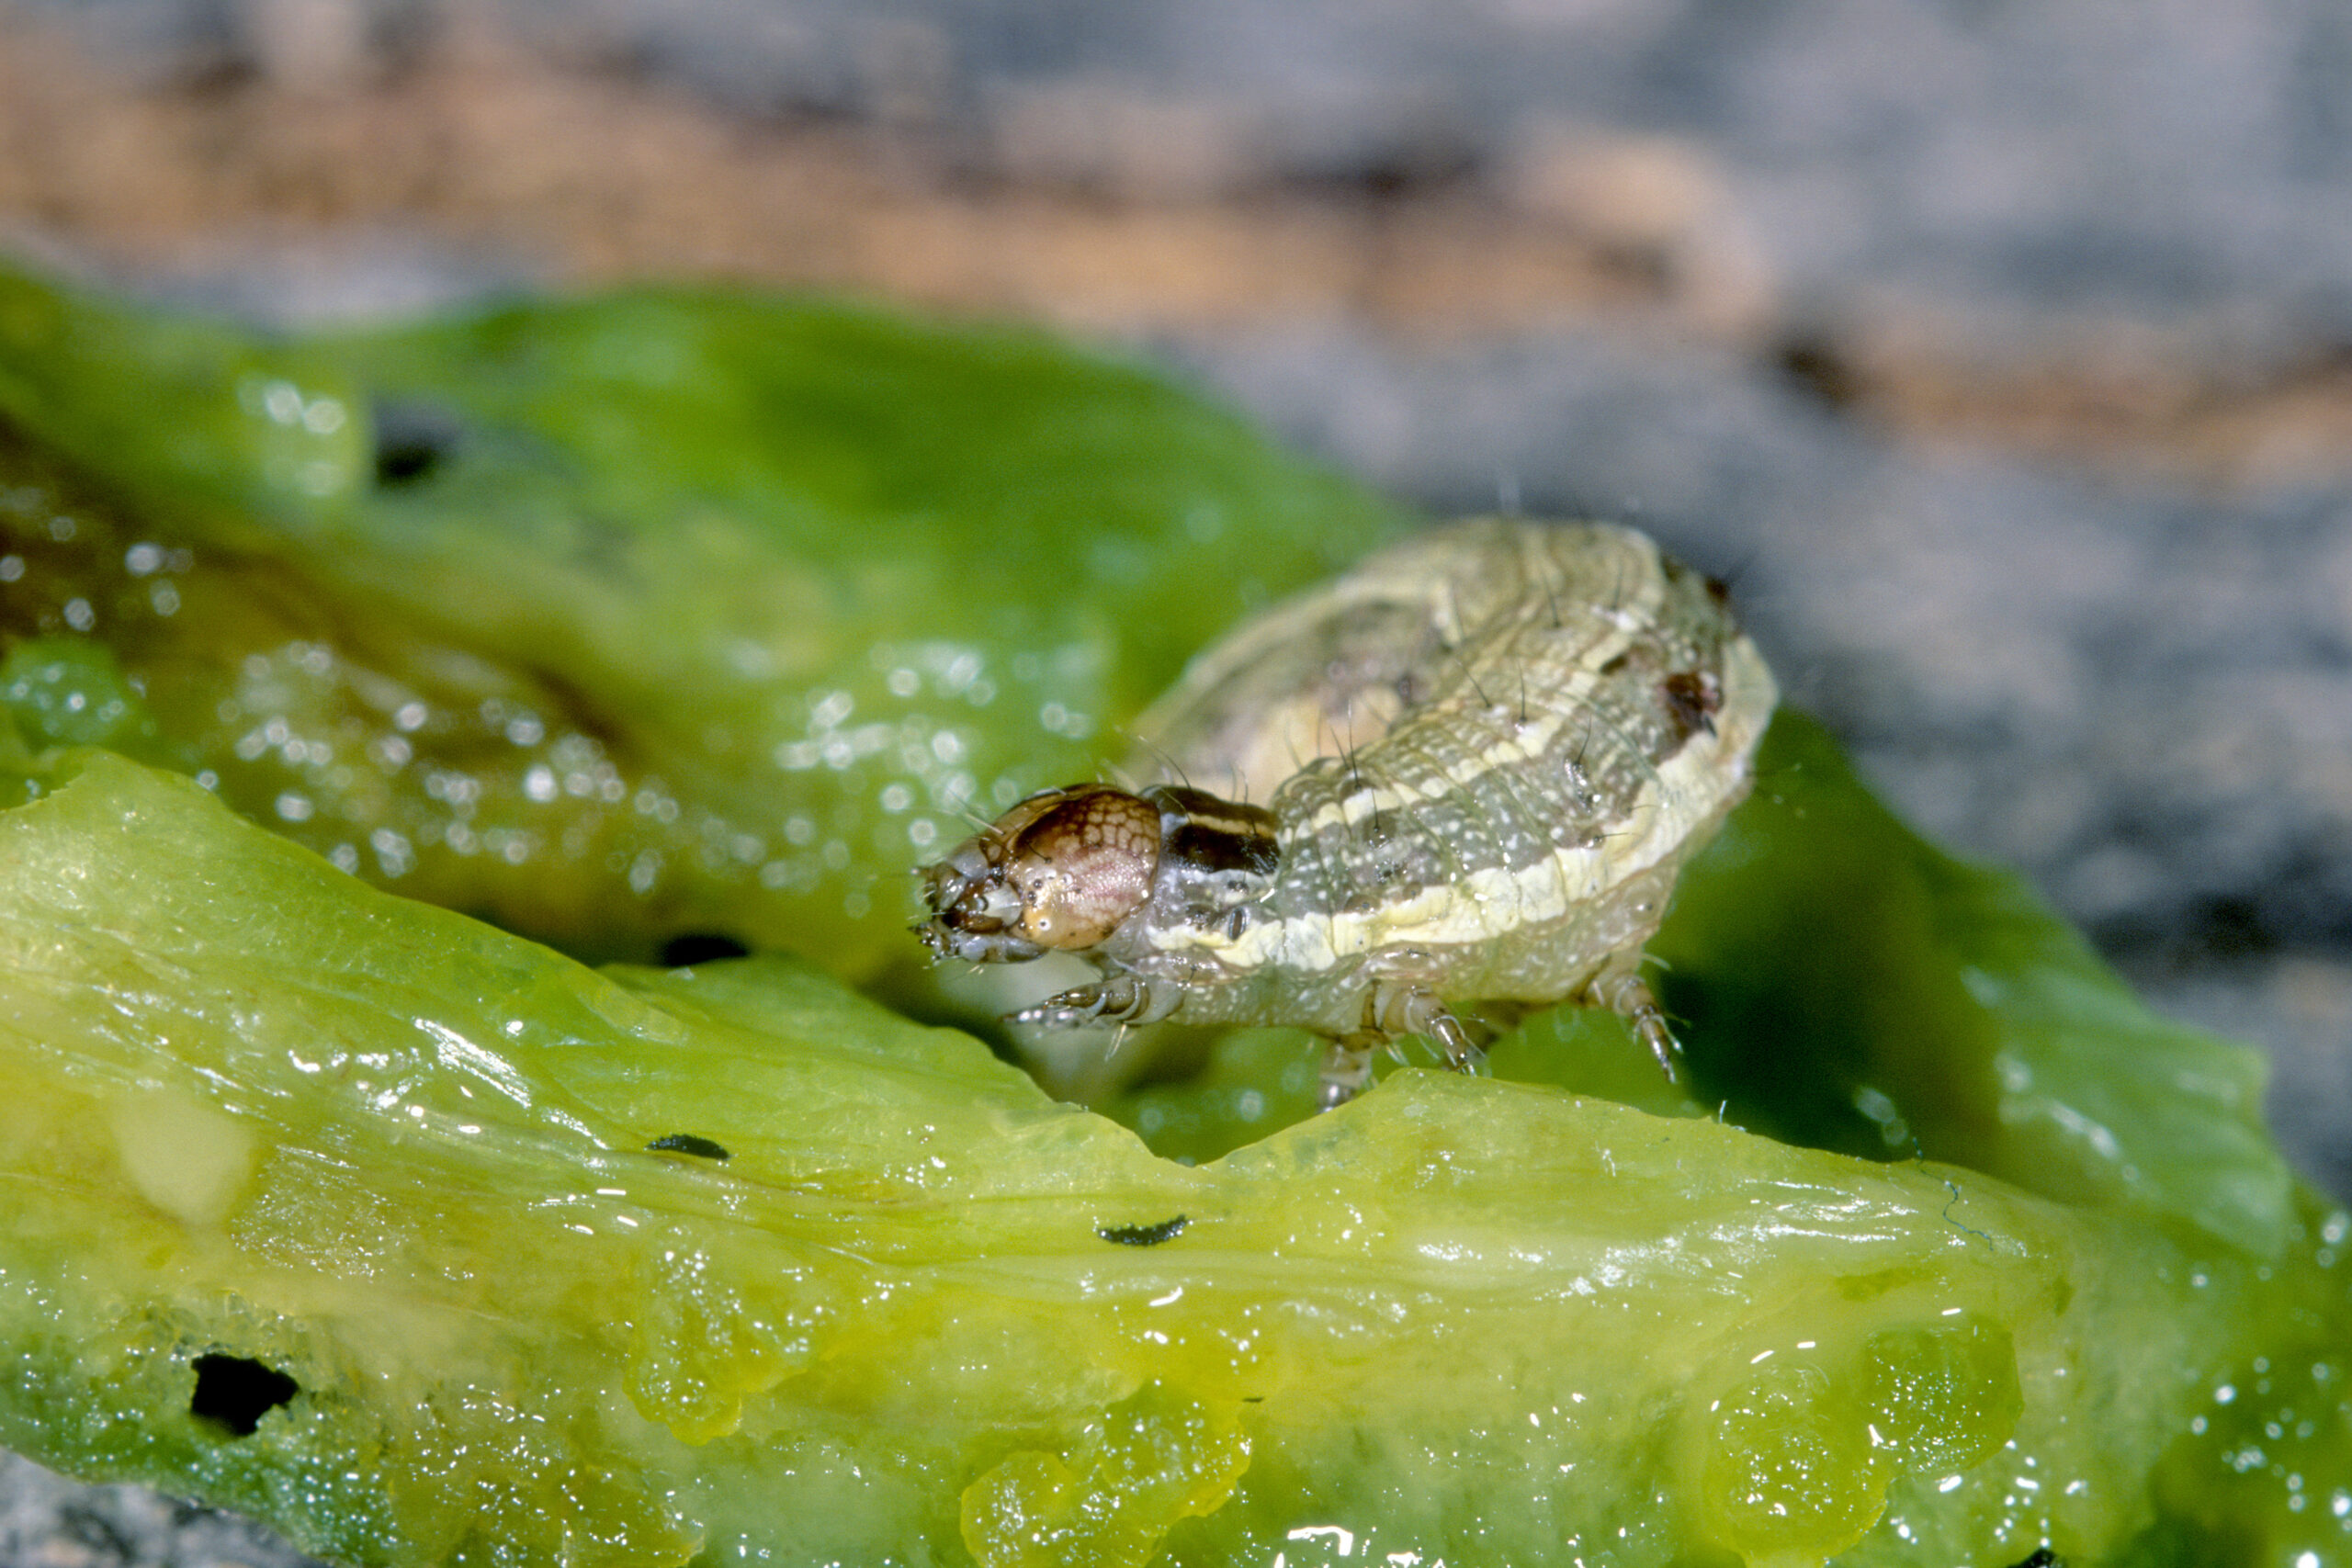 close up of fall armyworm on leaf